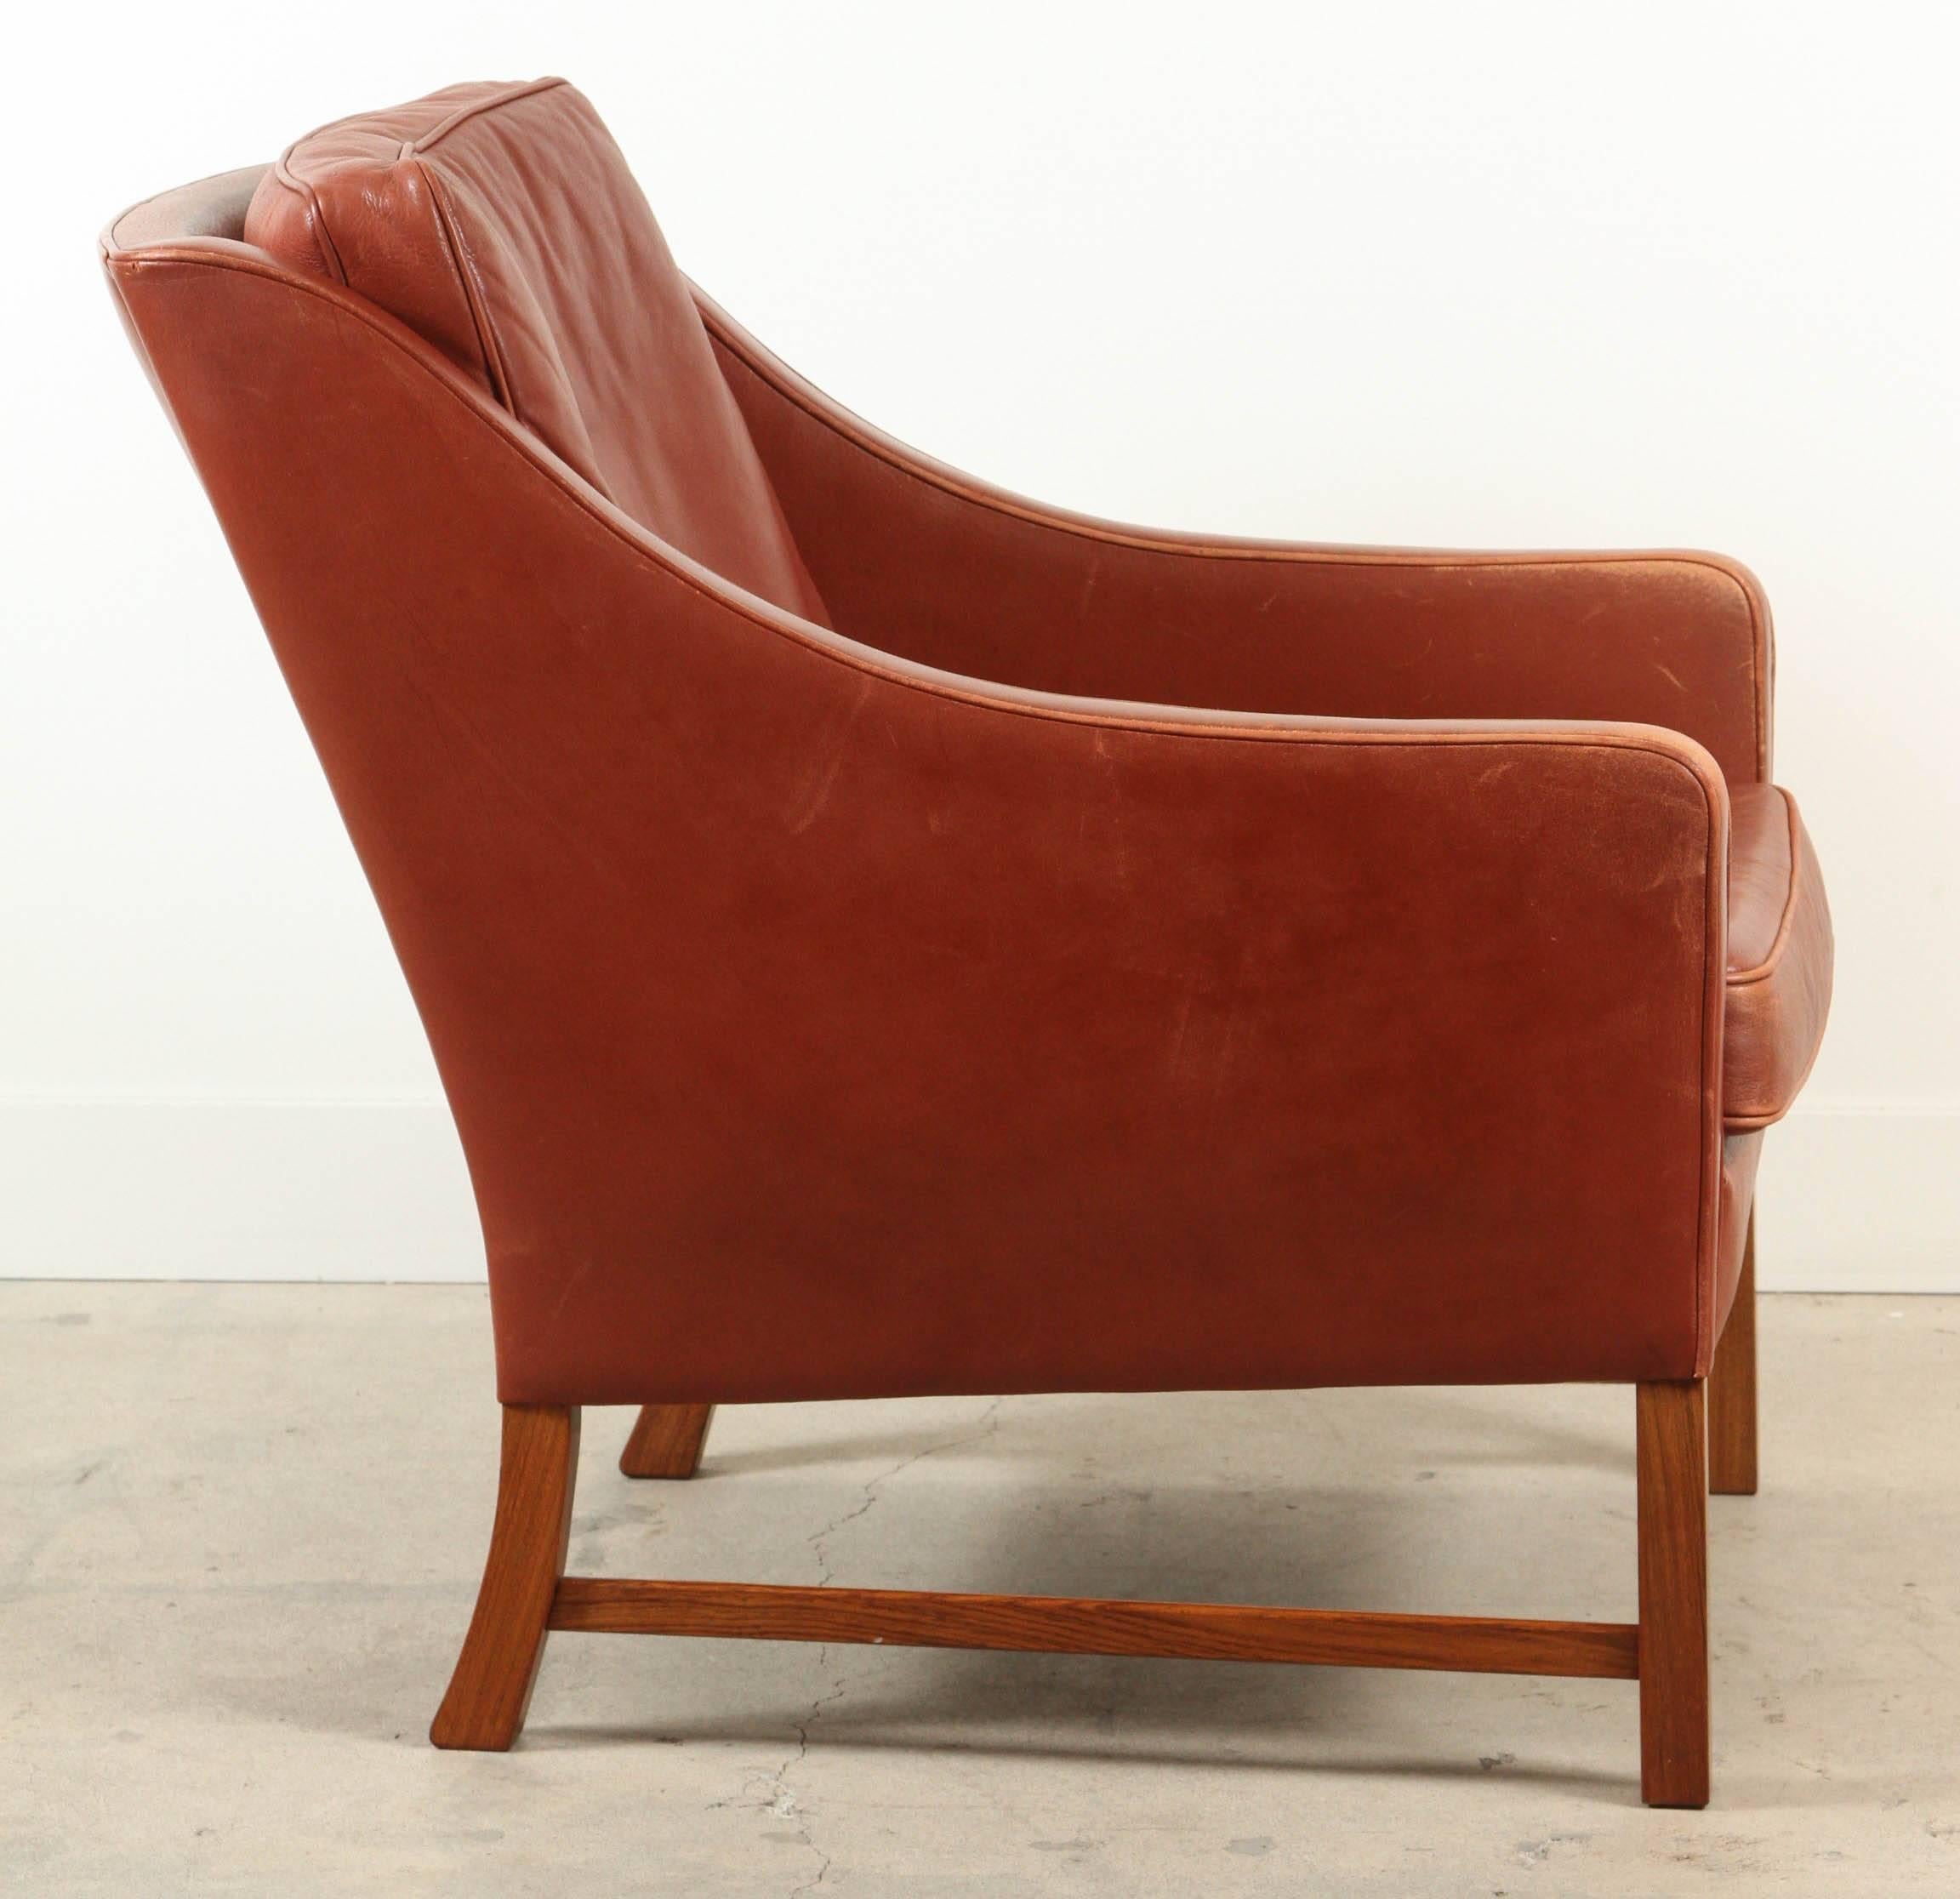 Mid-20th Century Danish Leather Club Chair by Frederik Kayser for Vatne Møbler